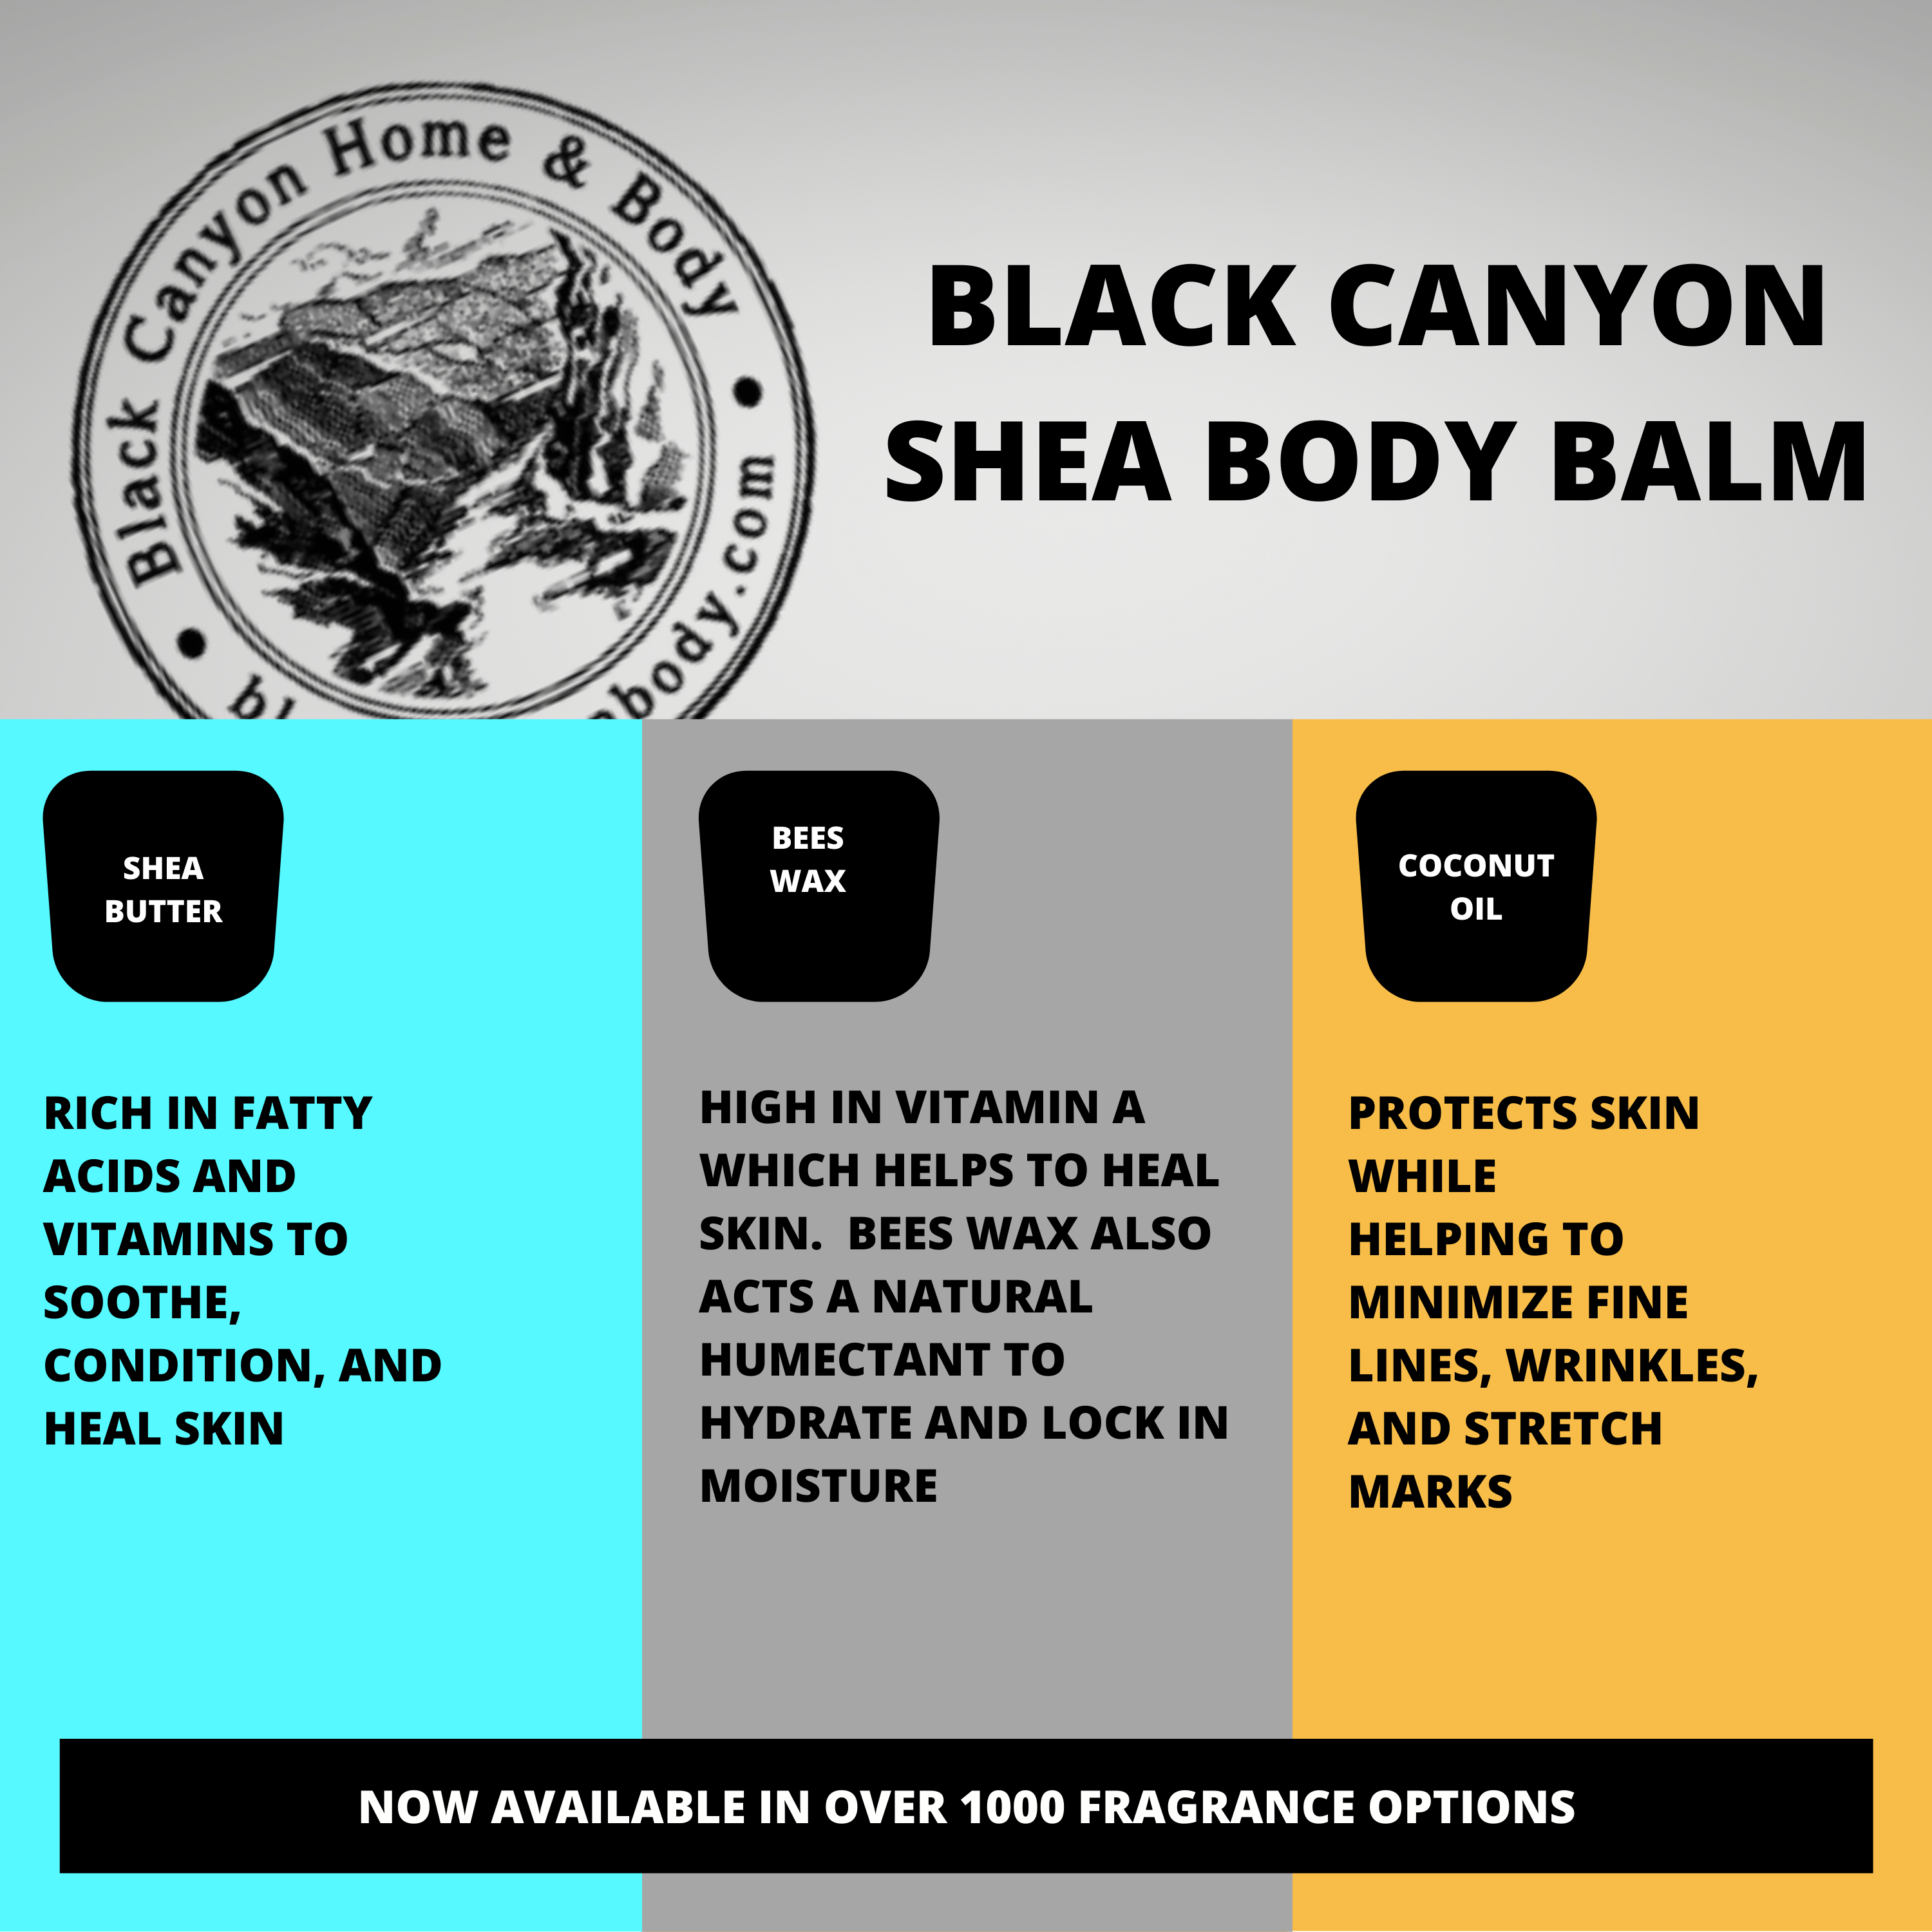 Black Canyon Caribbean Coconut Scented Natural Body Balm with Shea